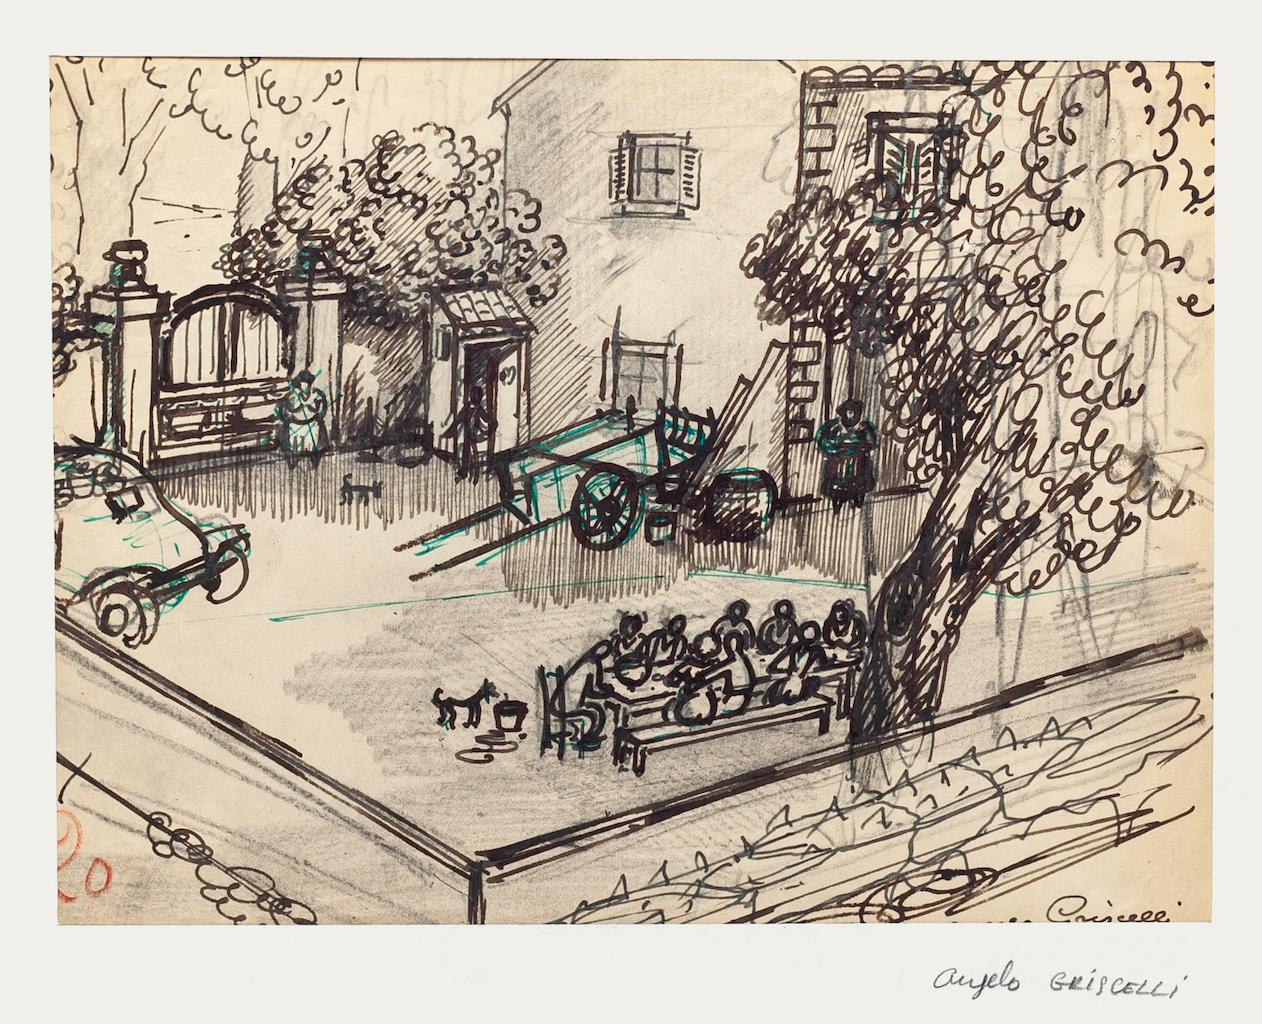 Lunch in The Countryside is an original drawing in pencil and China Ink on paper realized by Angelo Griscelli (1893 - 1970)

The state of preservation is good except for some cutaways on the margins and angles that don't affect the